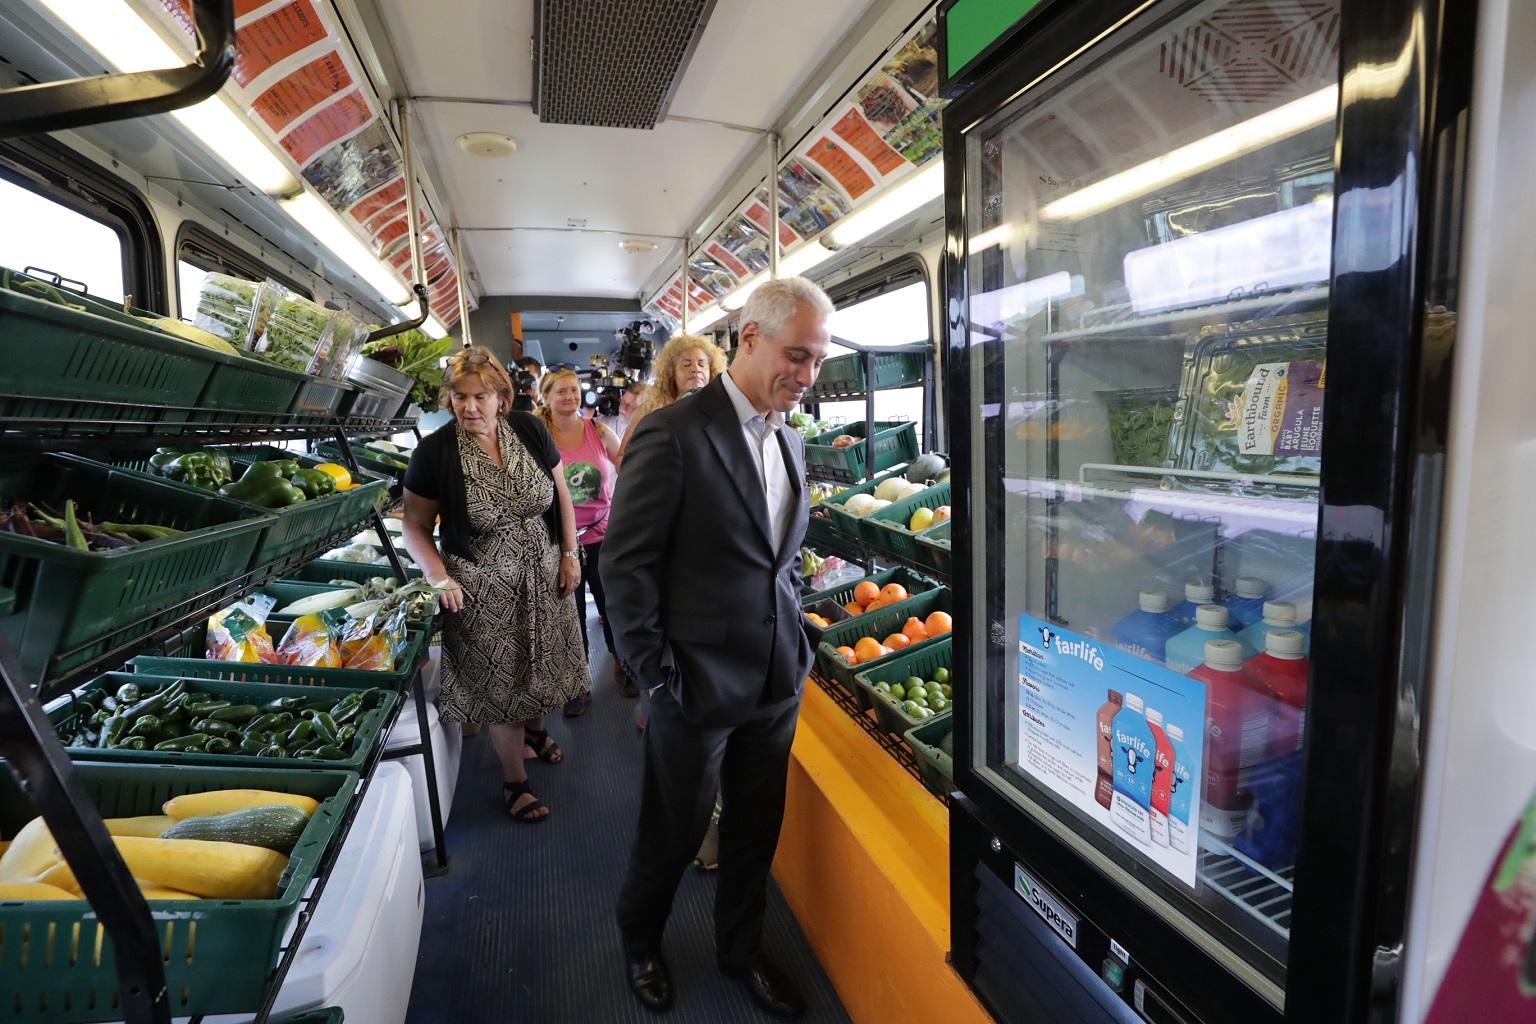 Mayor Rahm Emanuel tours a mobile market operated by the Urban Growers Collective during an event on Aug. 22, 2018. (Courtesy City of Chicago)